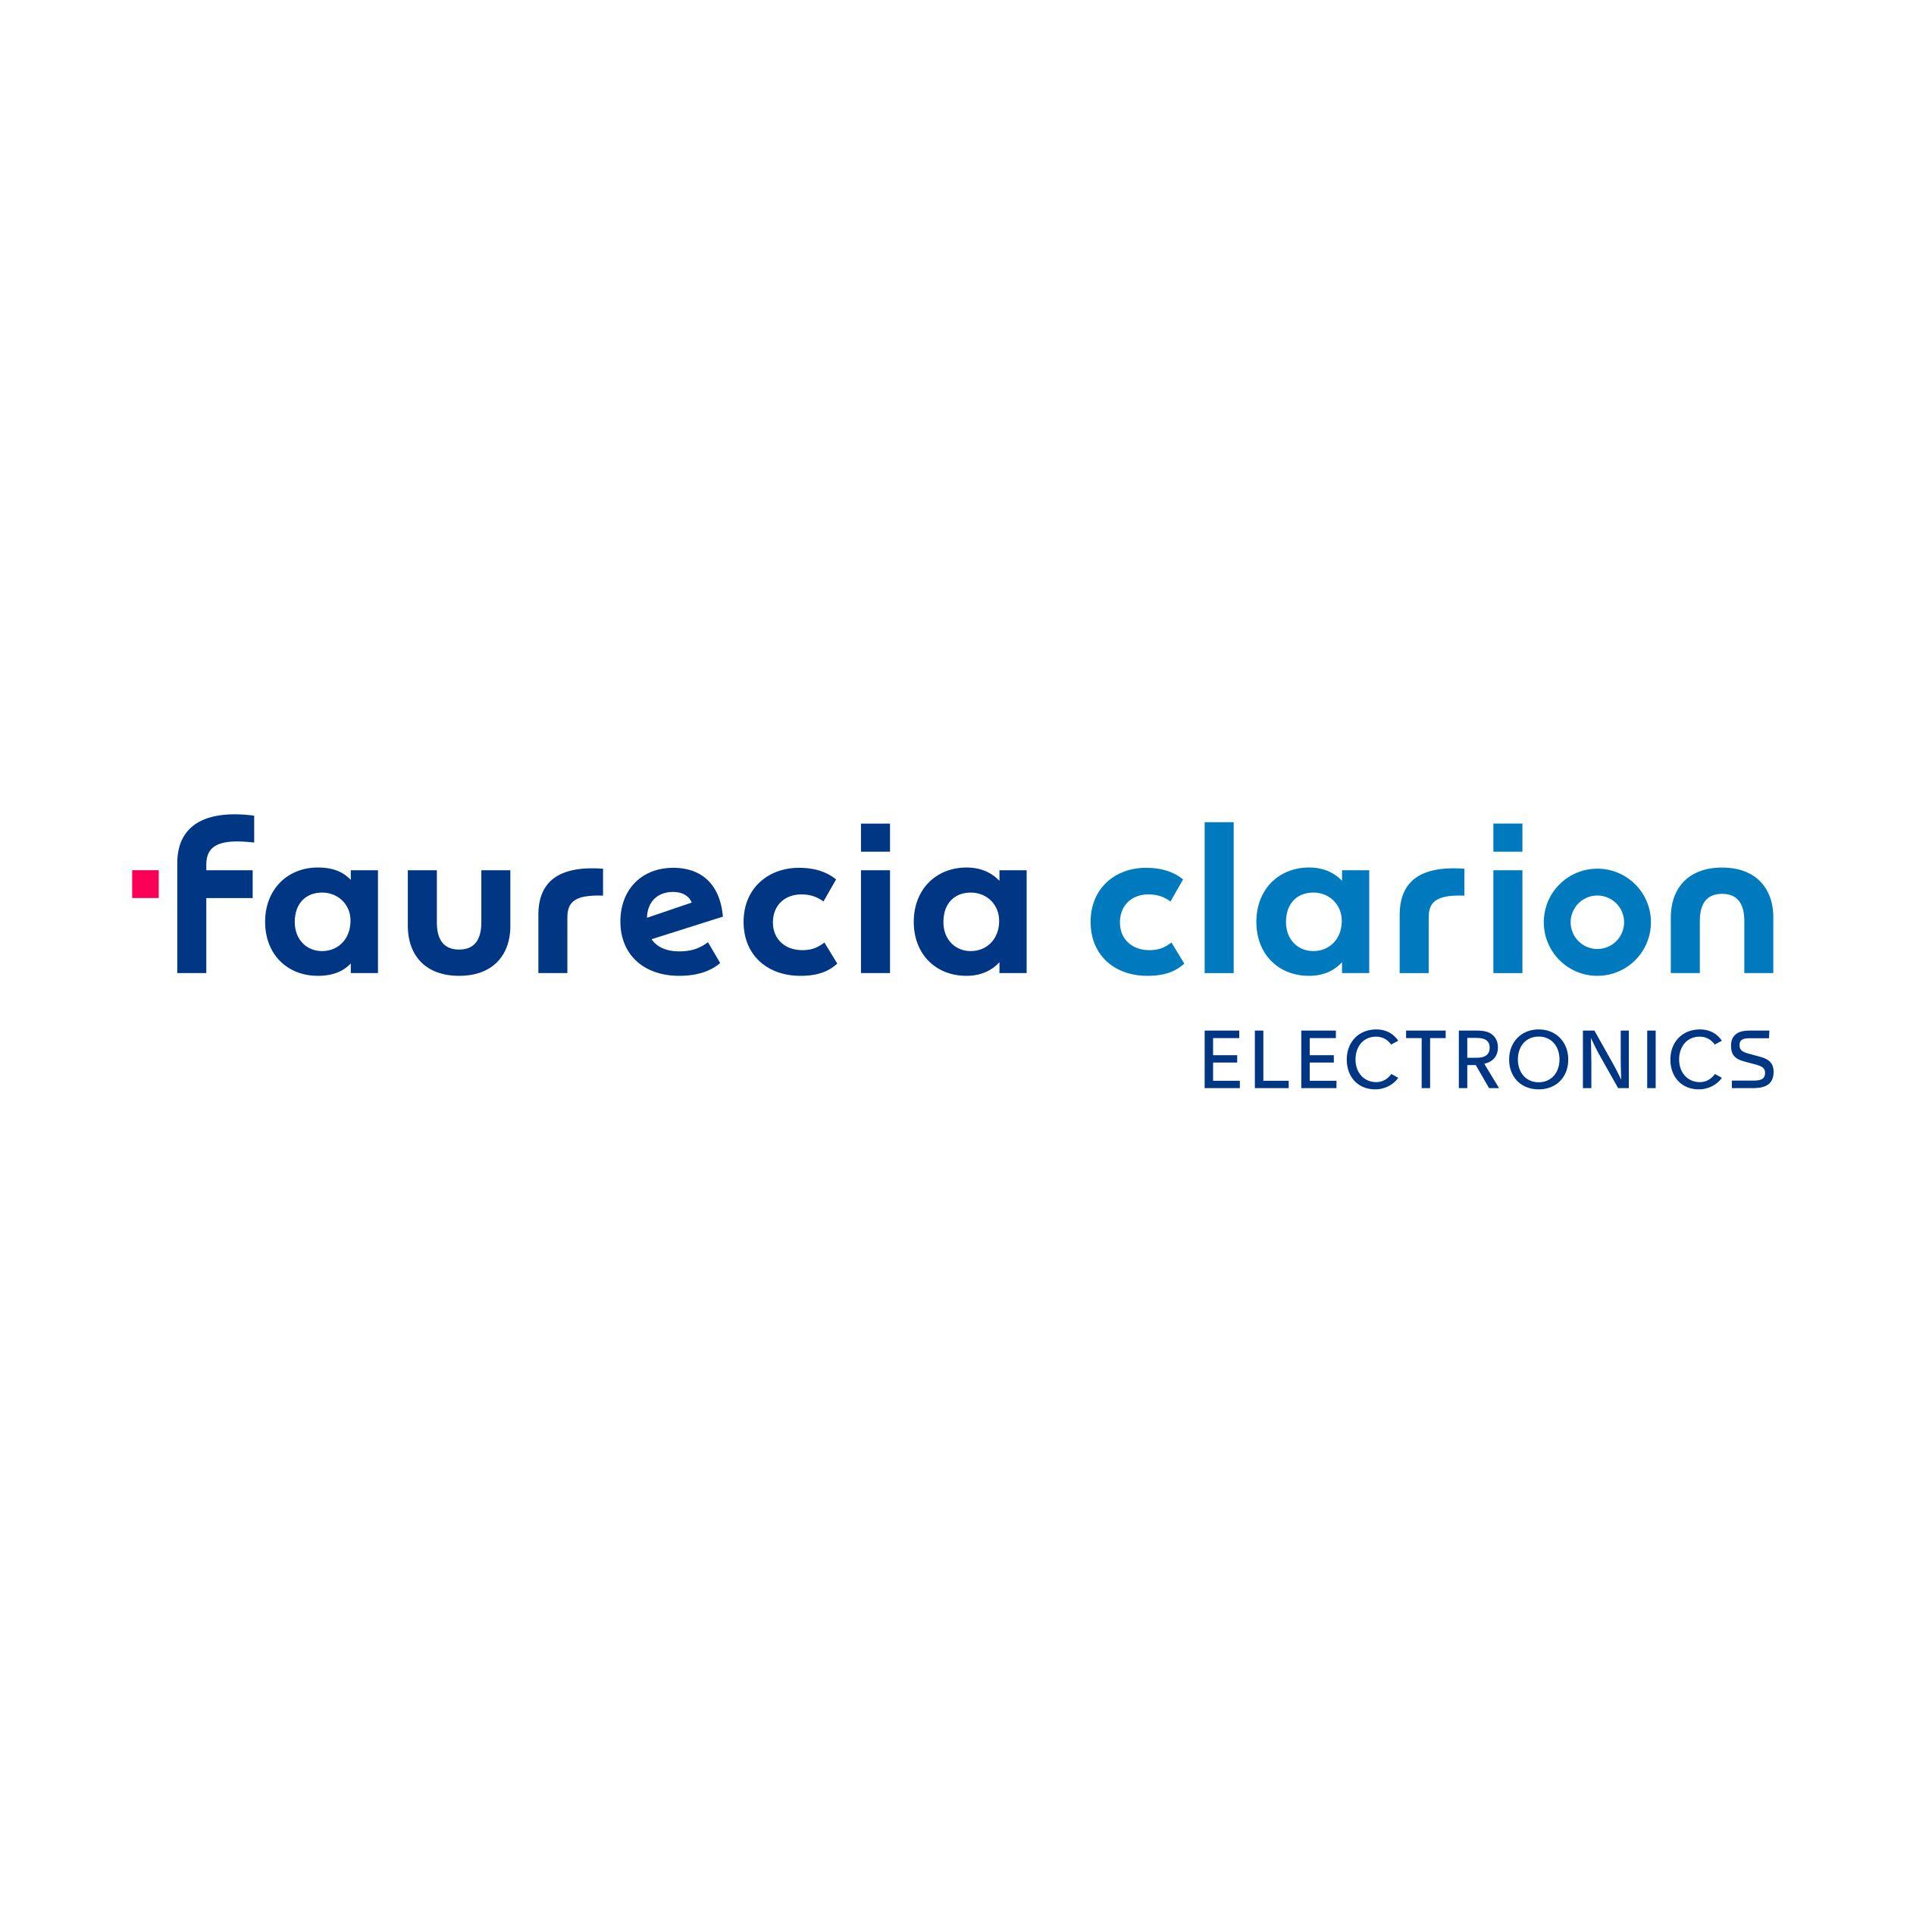 Clarion Logo - Faurecia launches fourth business group 